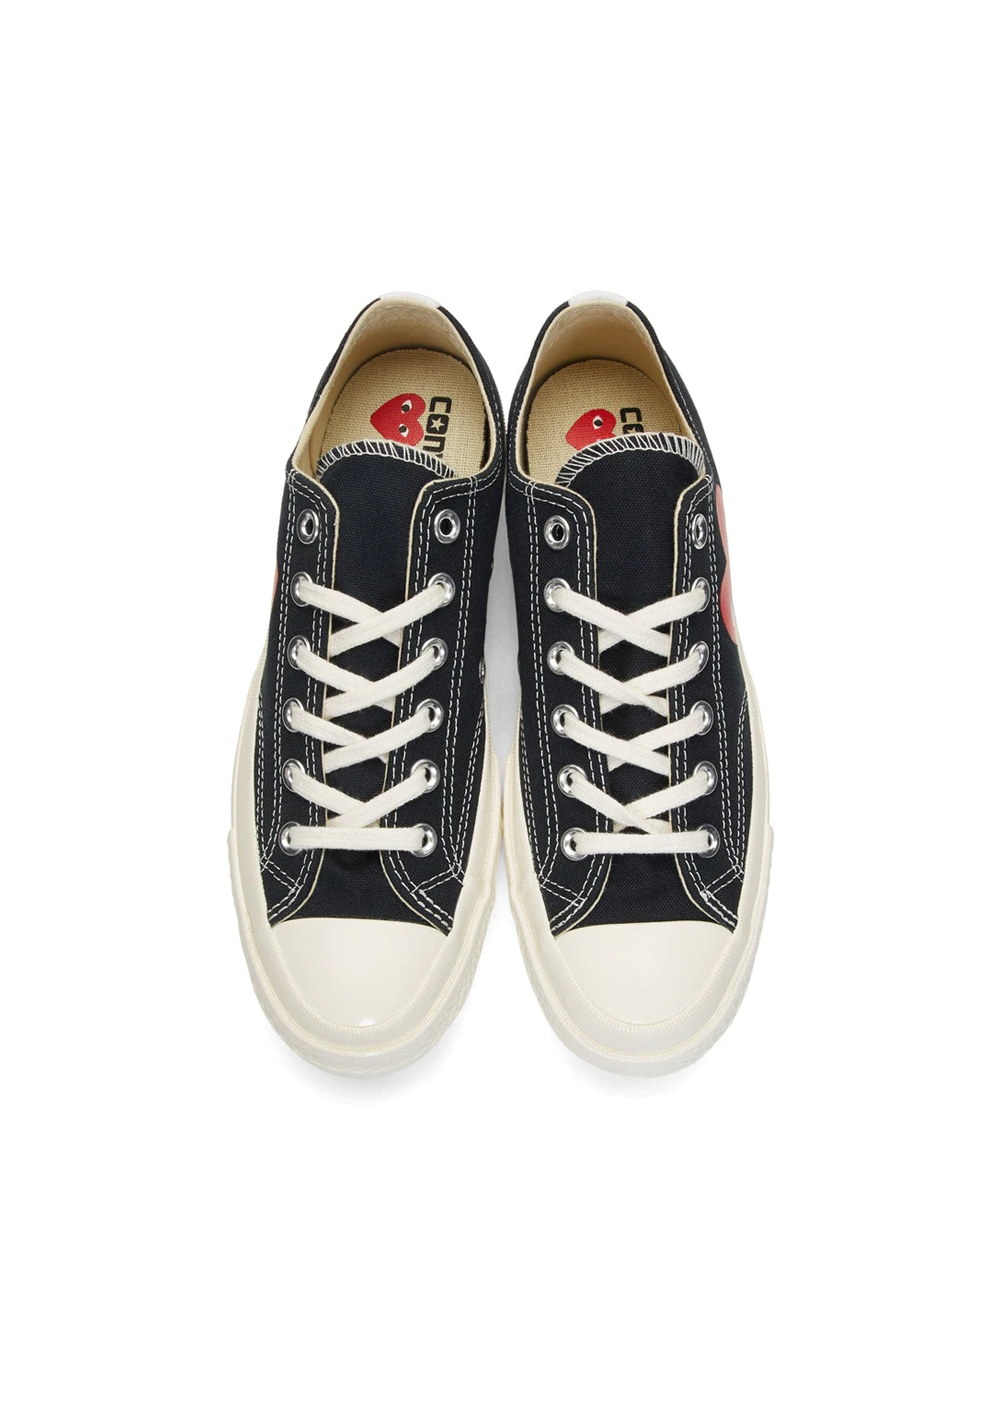 CDG Play Converse Low Black Chuck Sneakers